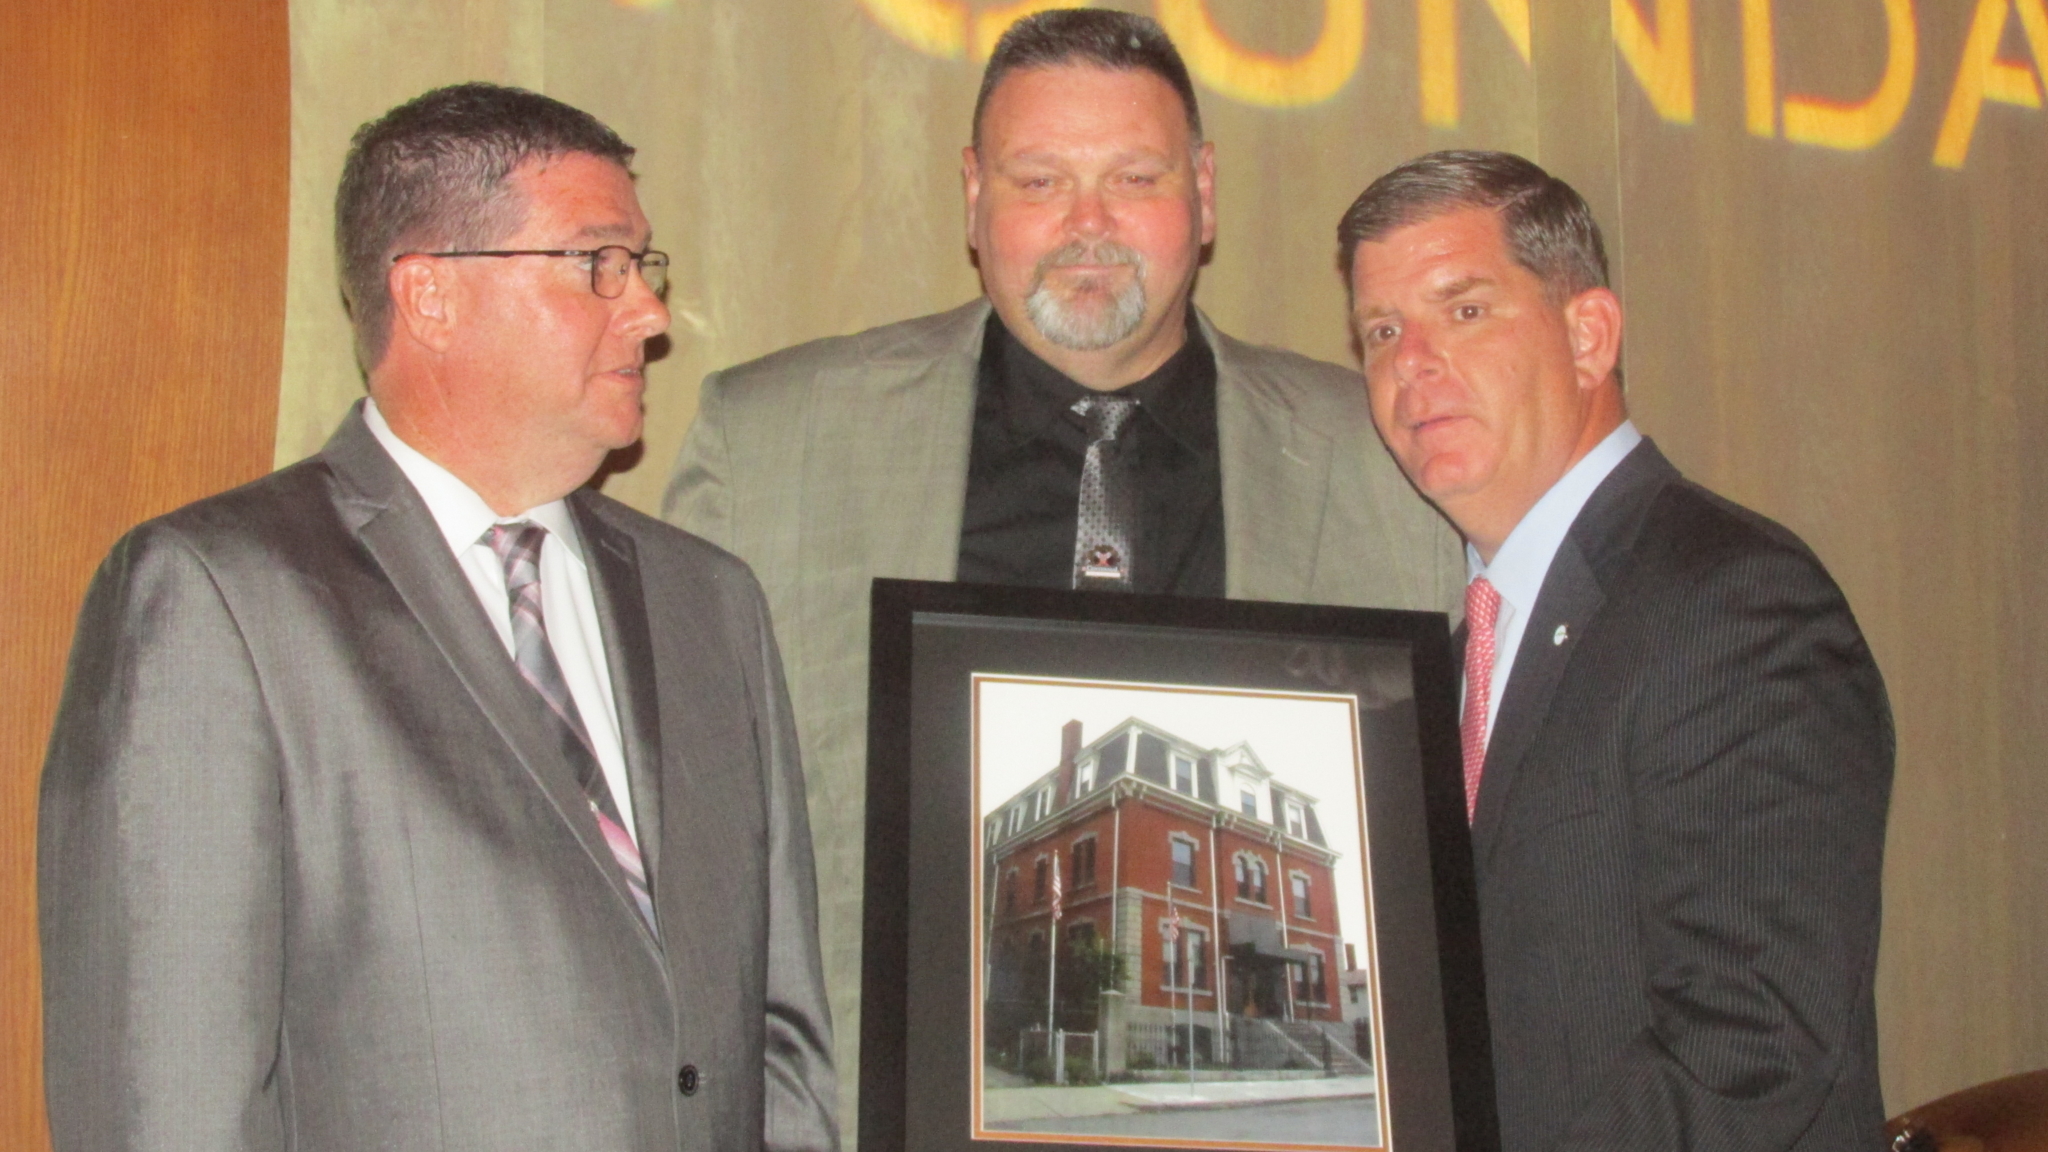 Mayor Marty Walsh (r.) presents the Gavin’s “Caring Hearts” Award to Business Agent Peter Gibbons and Mark Fortune of the Sprinkler Fitters Local 550. 